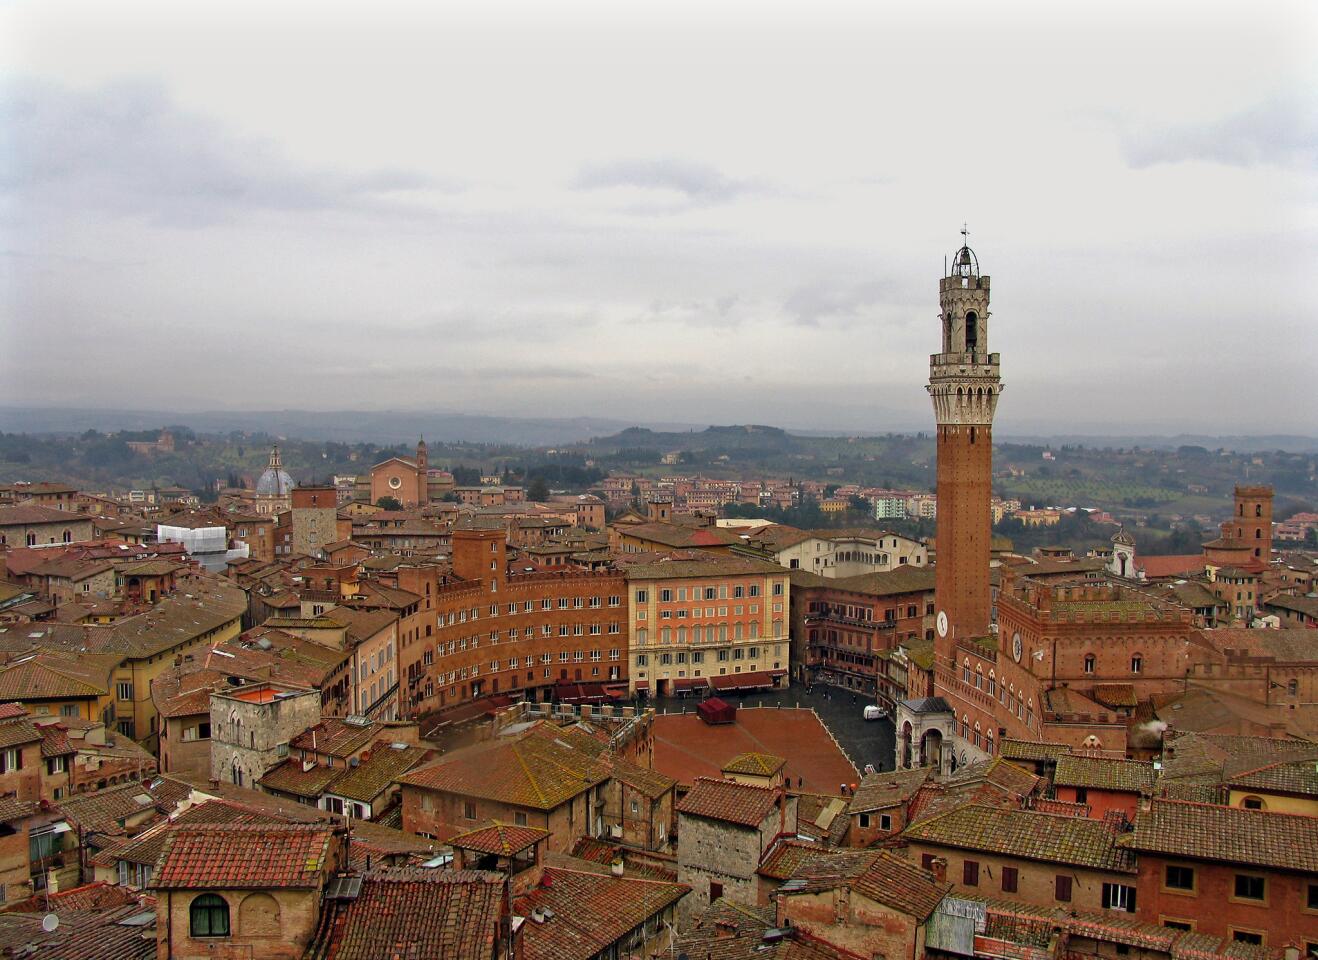 Medieval Siena stretches over three steep hills in the heart of the Chianti region of Tuscany. It's renowned for its Gothic cathedral as well as its Piazza del Campo, whose paving stones were laid in 1347. -- Alan C. Miller